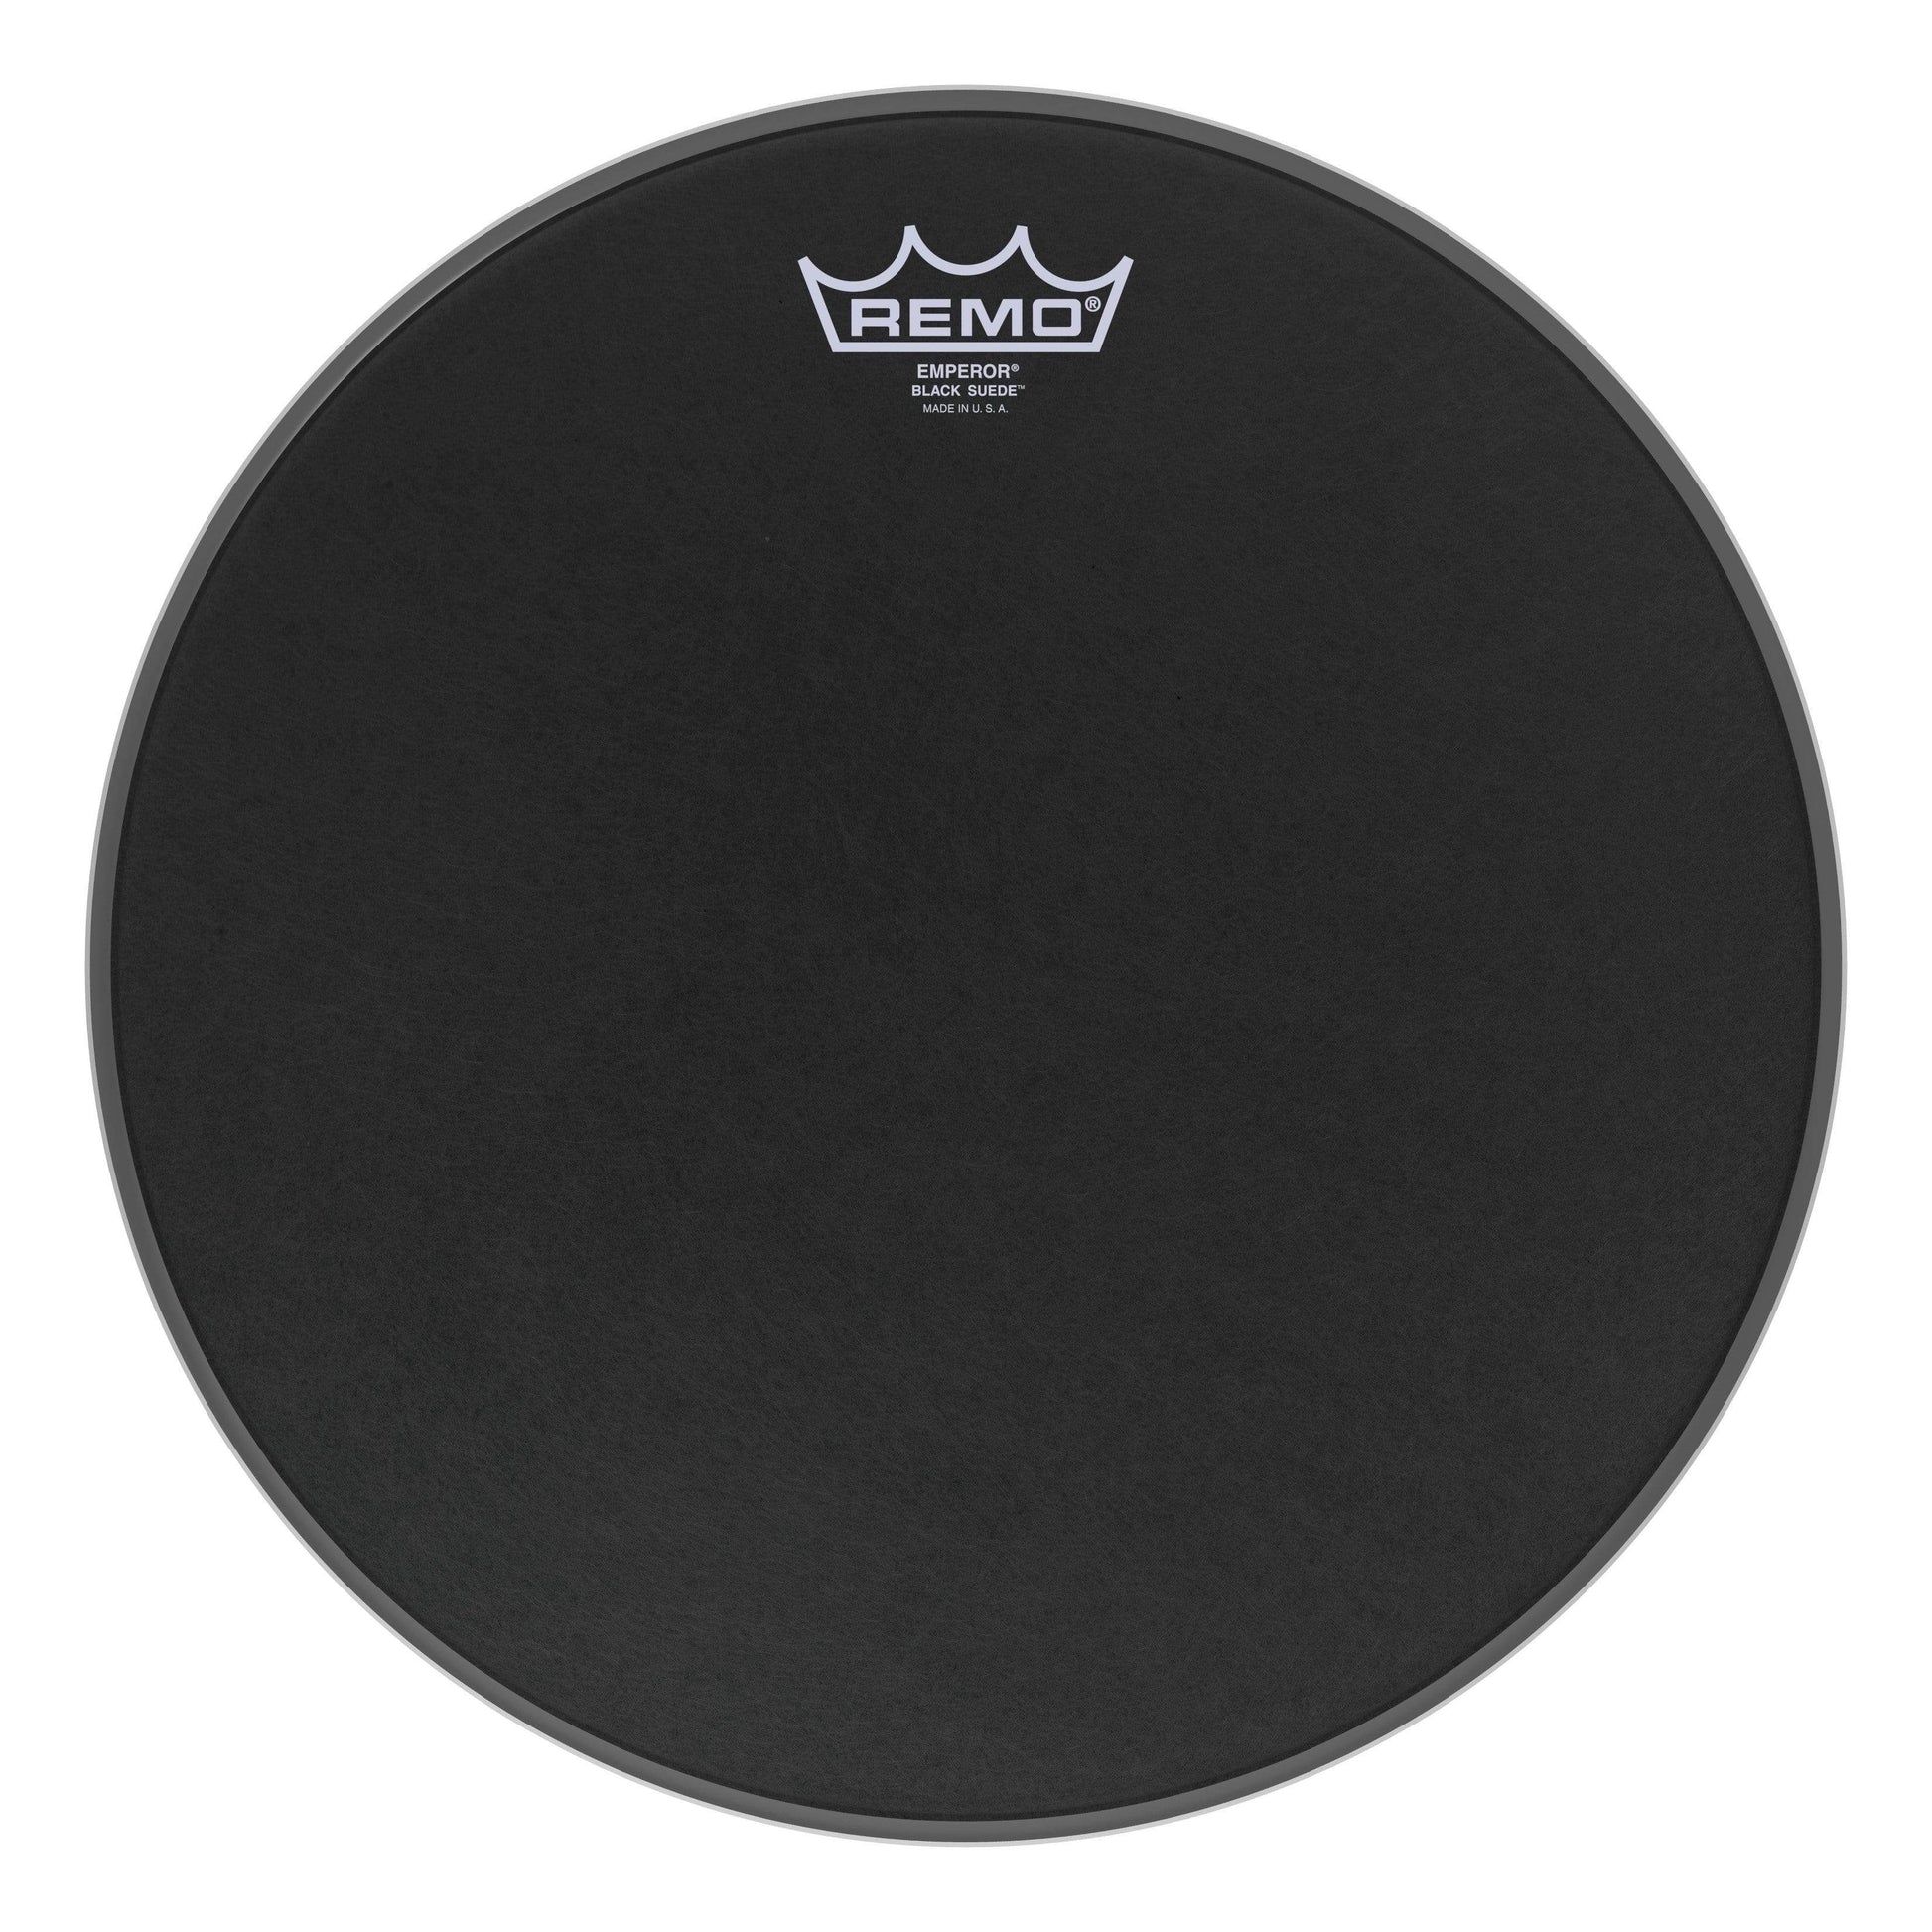 Remo 13" Emperor Black Suede Drumhead Drums and Percussion / Parts and Accessories / Heads